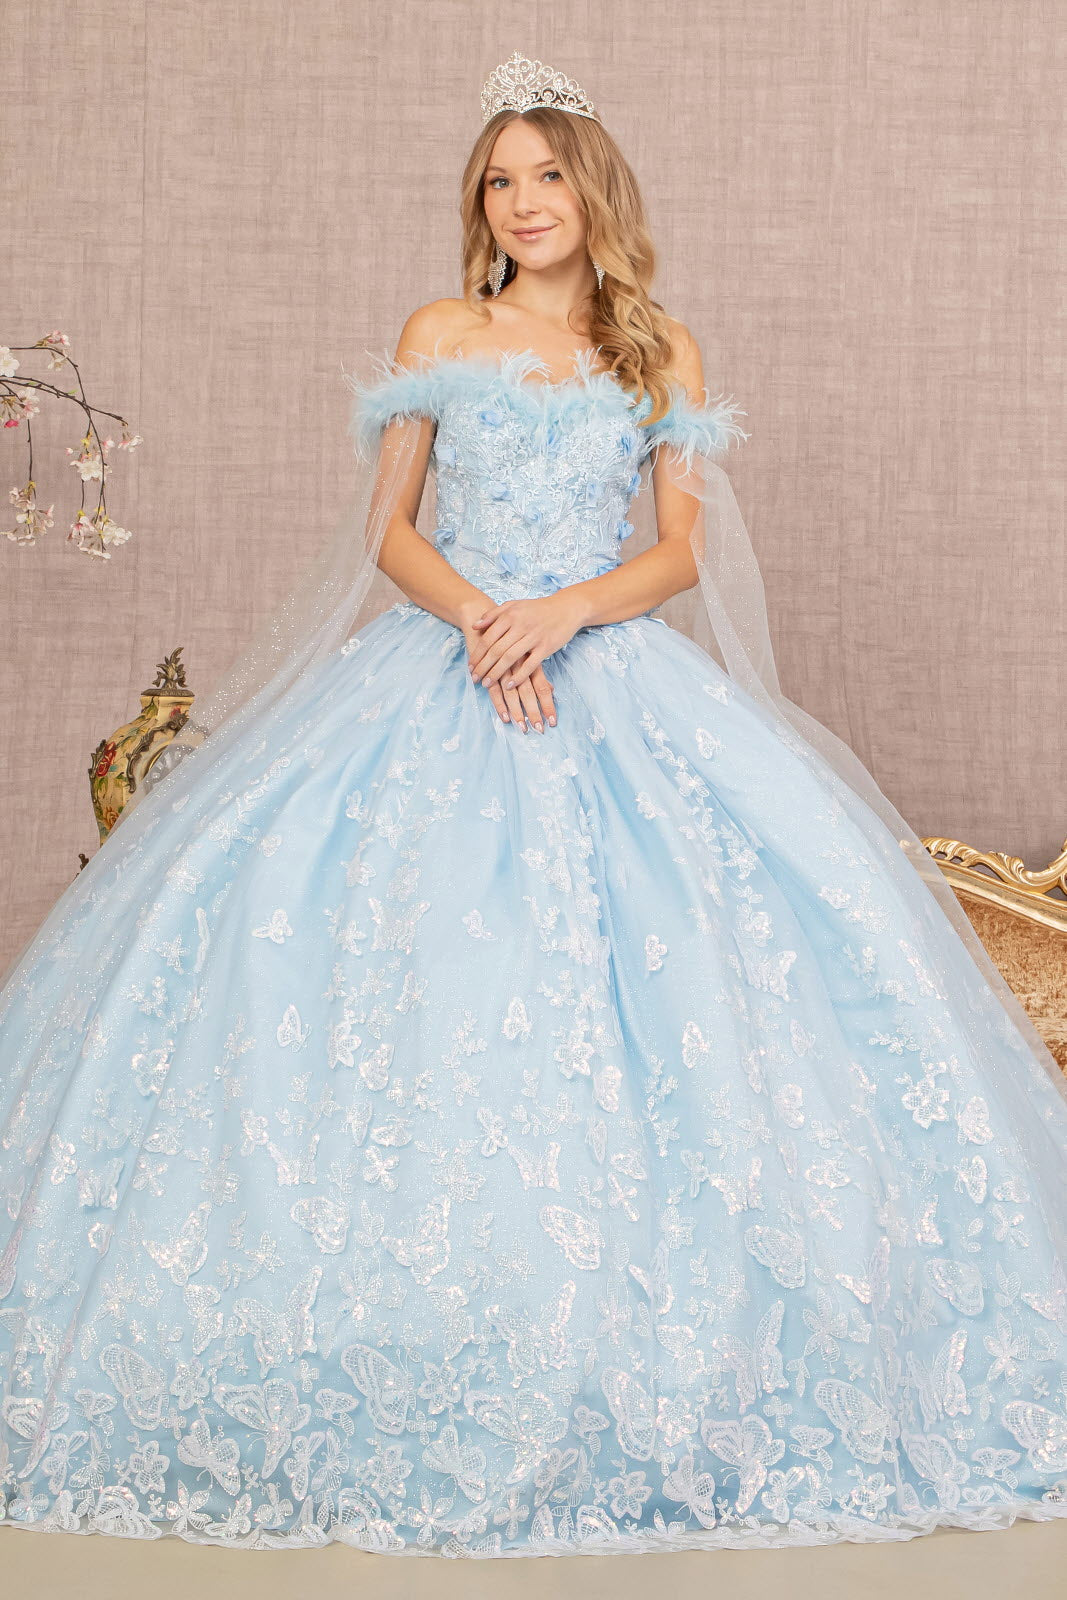 Baby Blue Off the Shoulder Feather 3-D Flower Quinceanera Dress with Detachable Side Mesh Layer - GL3166